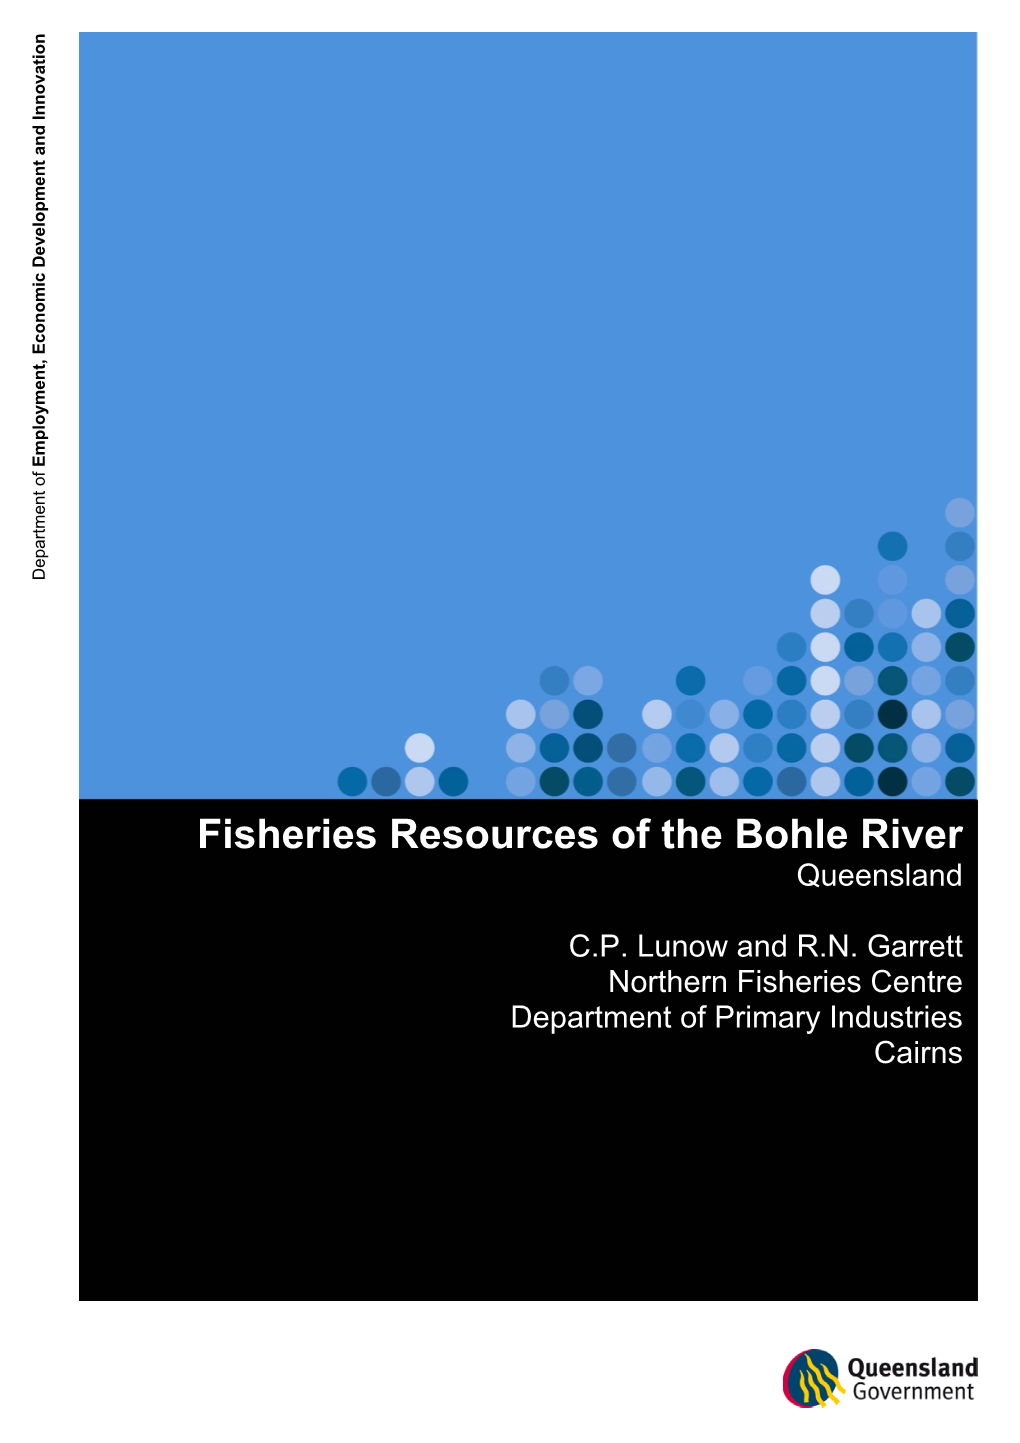 Fisheries Resources of the Bohle Rover